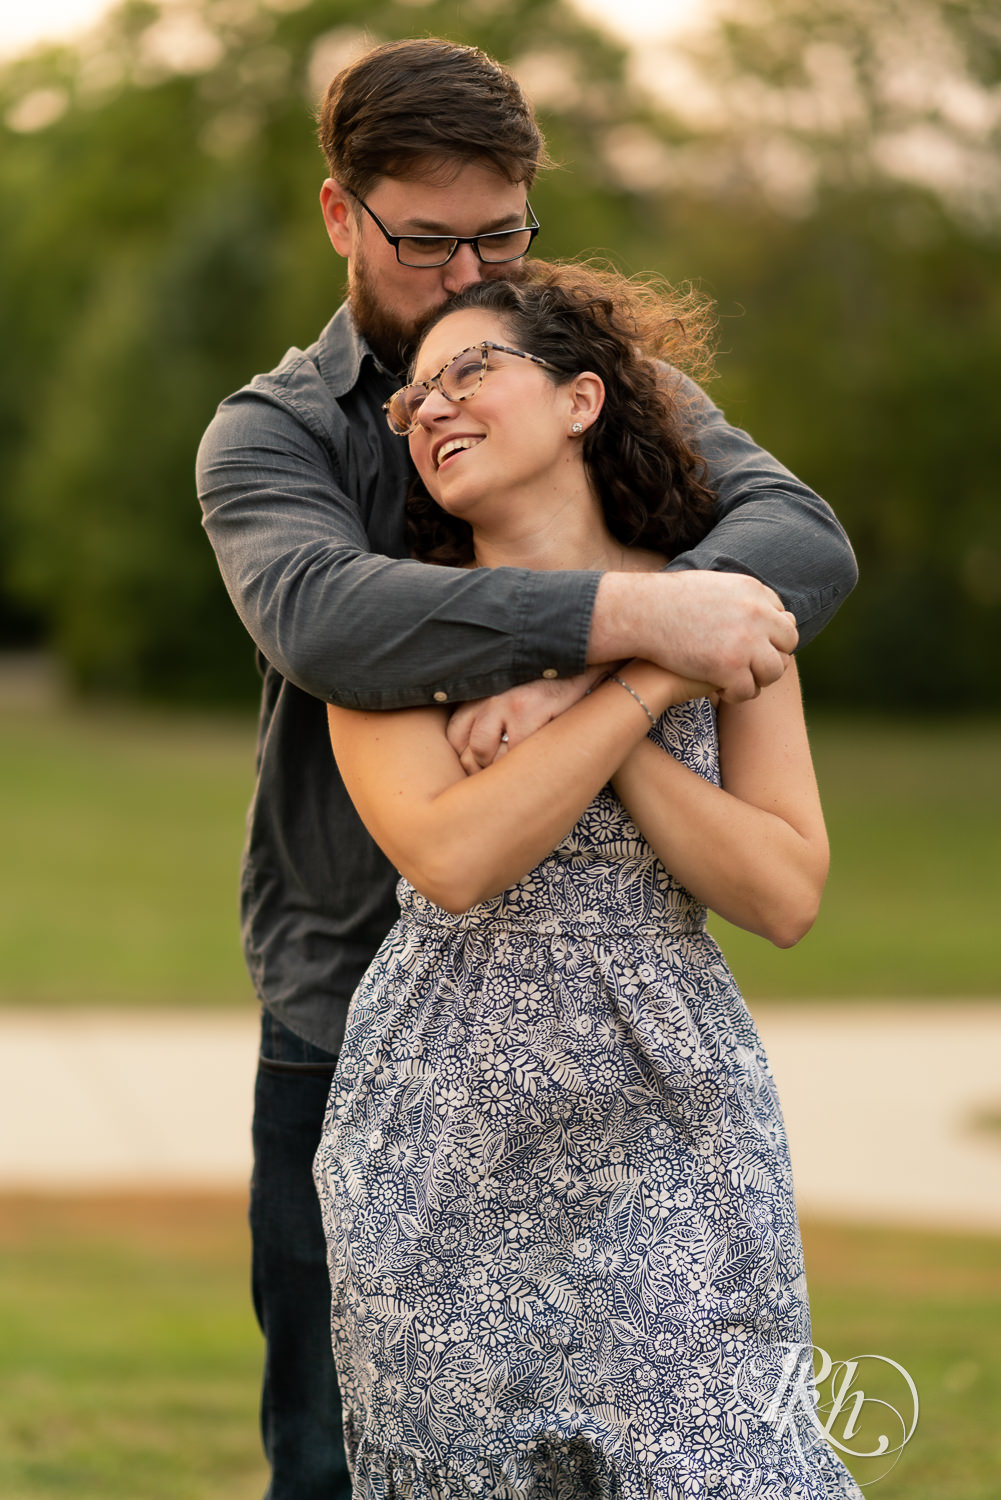 Man and woman in glasses holding each other at sunset engagement session.